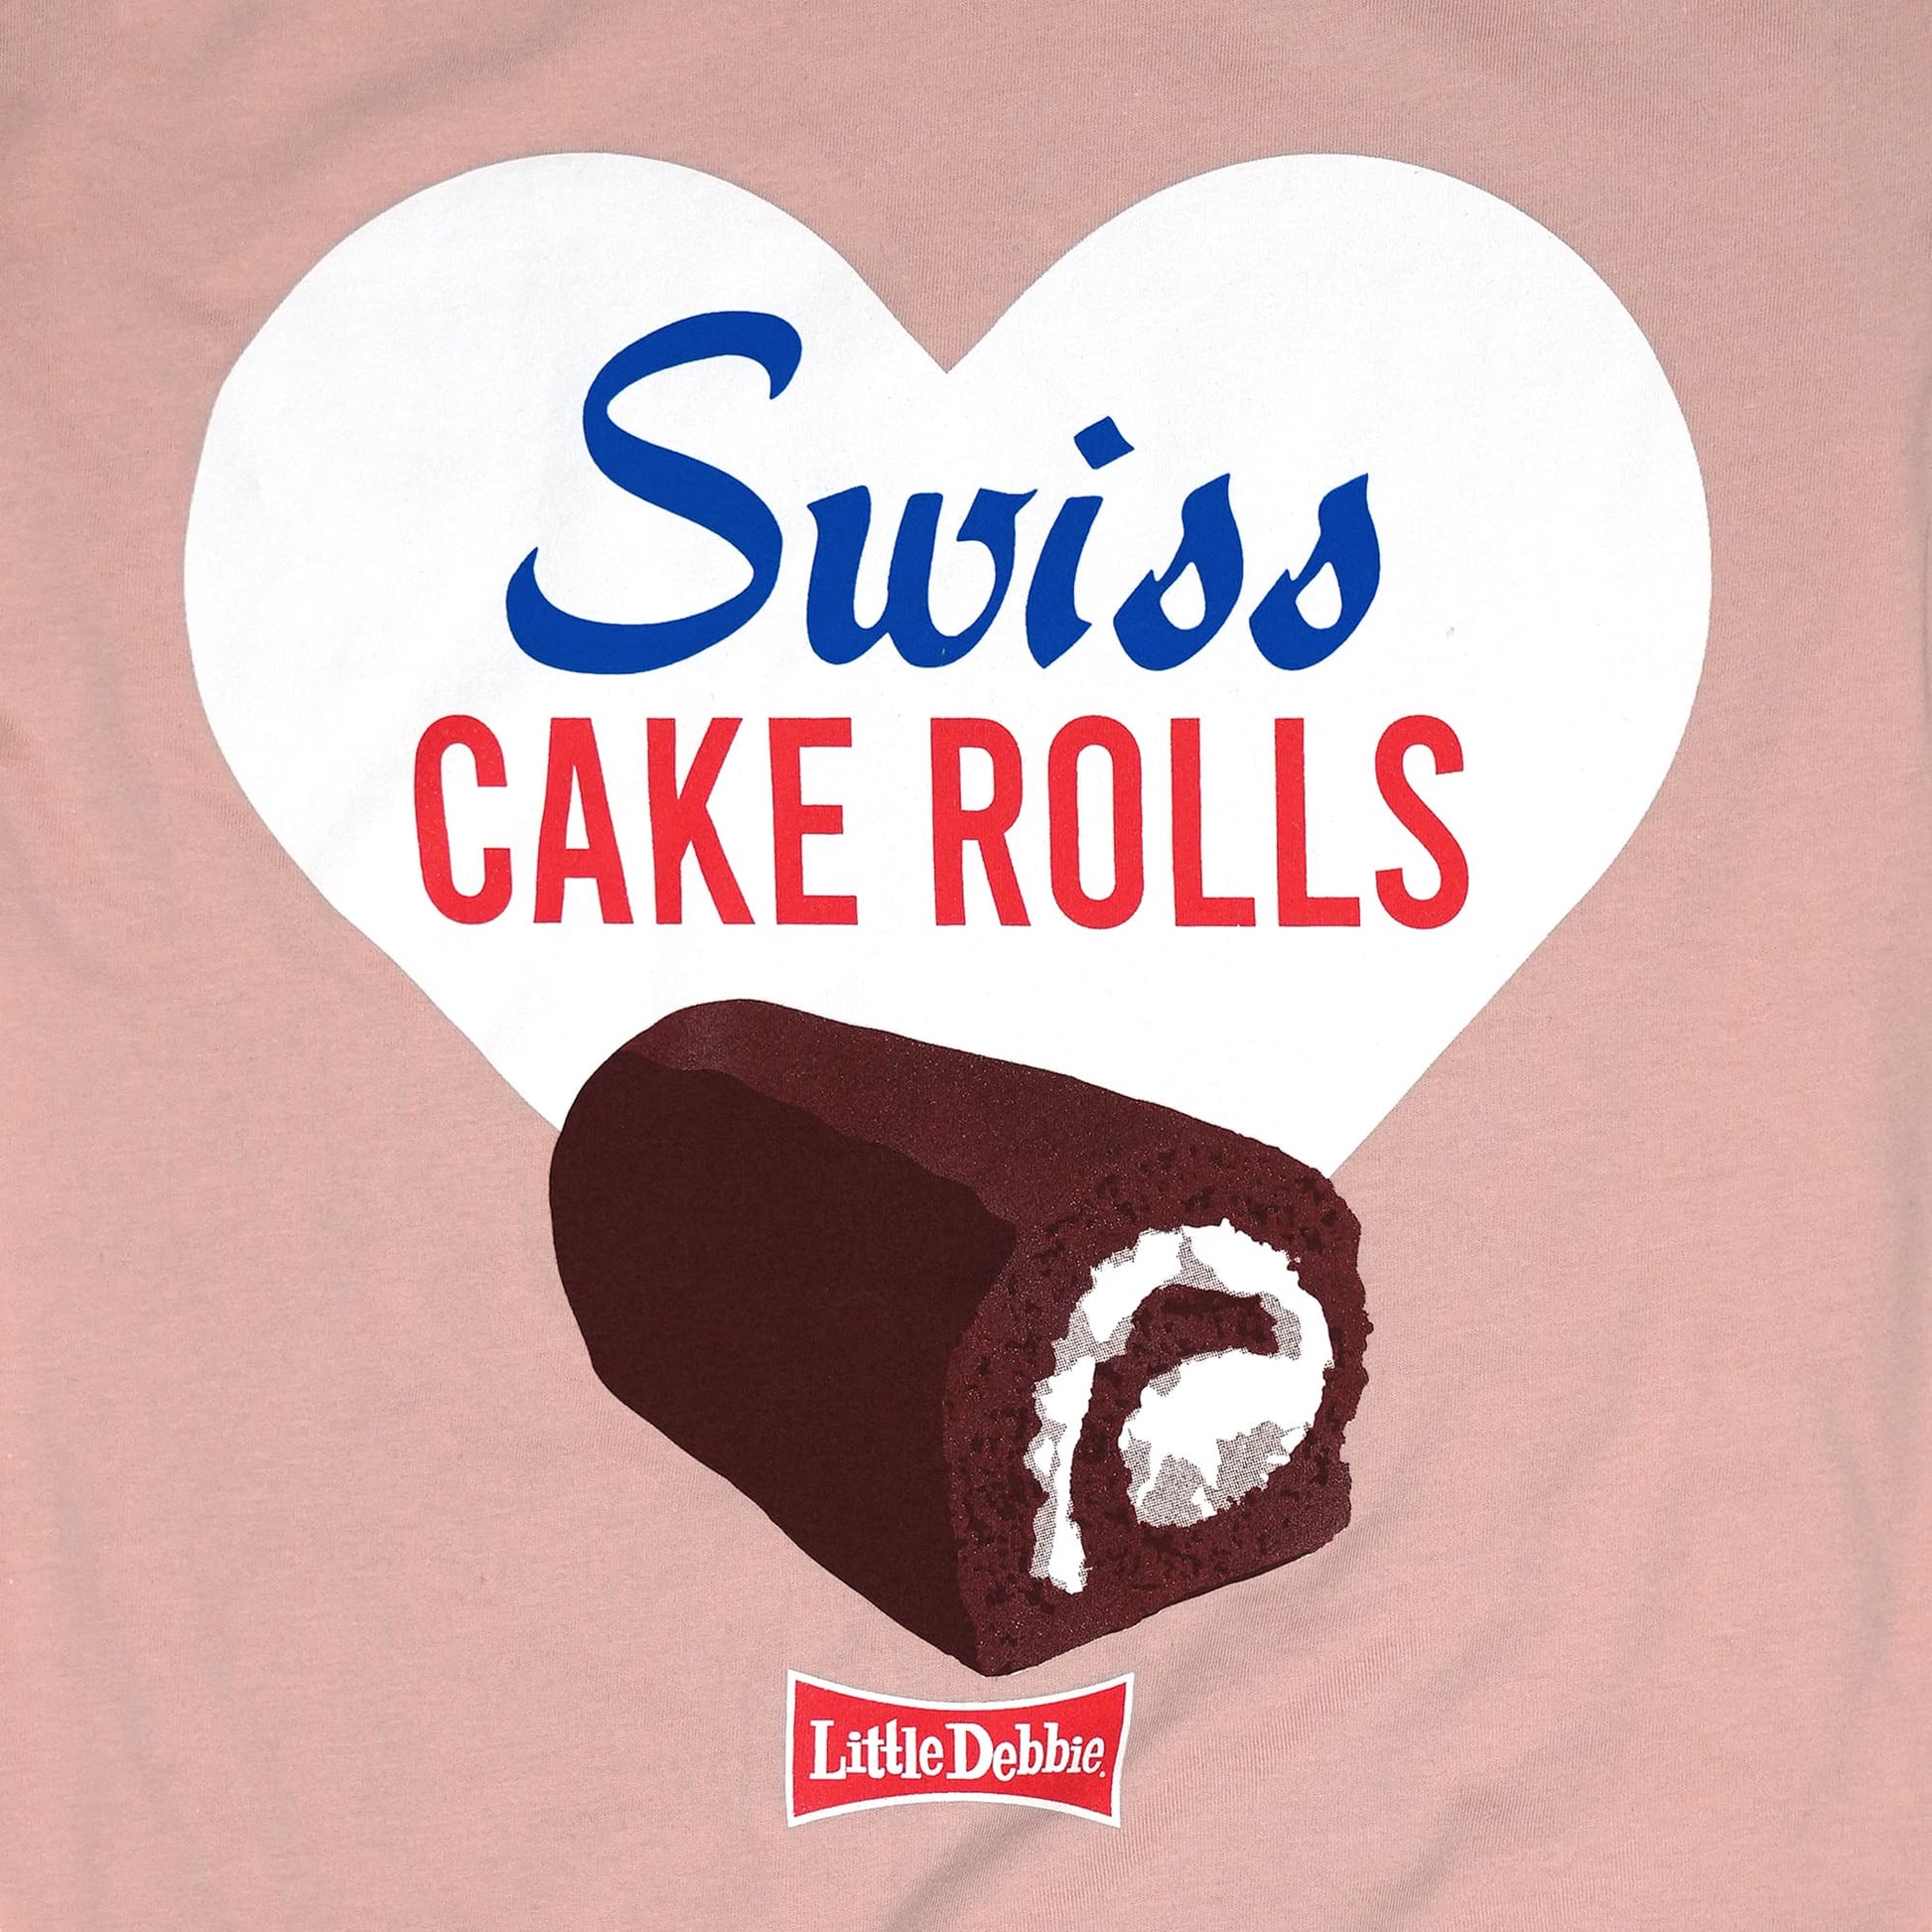 Close-up view of a graphic on a pink t-shirt featuring a large white heart with the text 'Swiss Cake Rolls' in blue and red. Inside the heart, there's an illustrated Swiss Cake Roll with a chocolate exterior and white cream swirl visible in the cross-section. A small red Little Debbie logo is placed at the bottom of the heart.